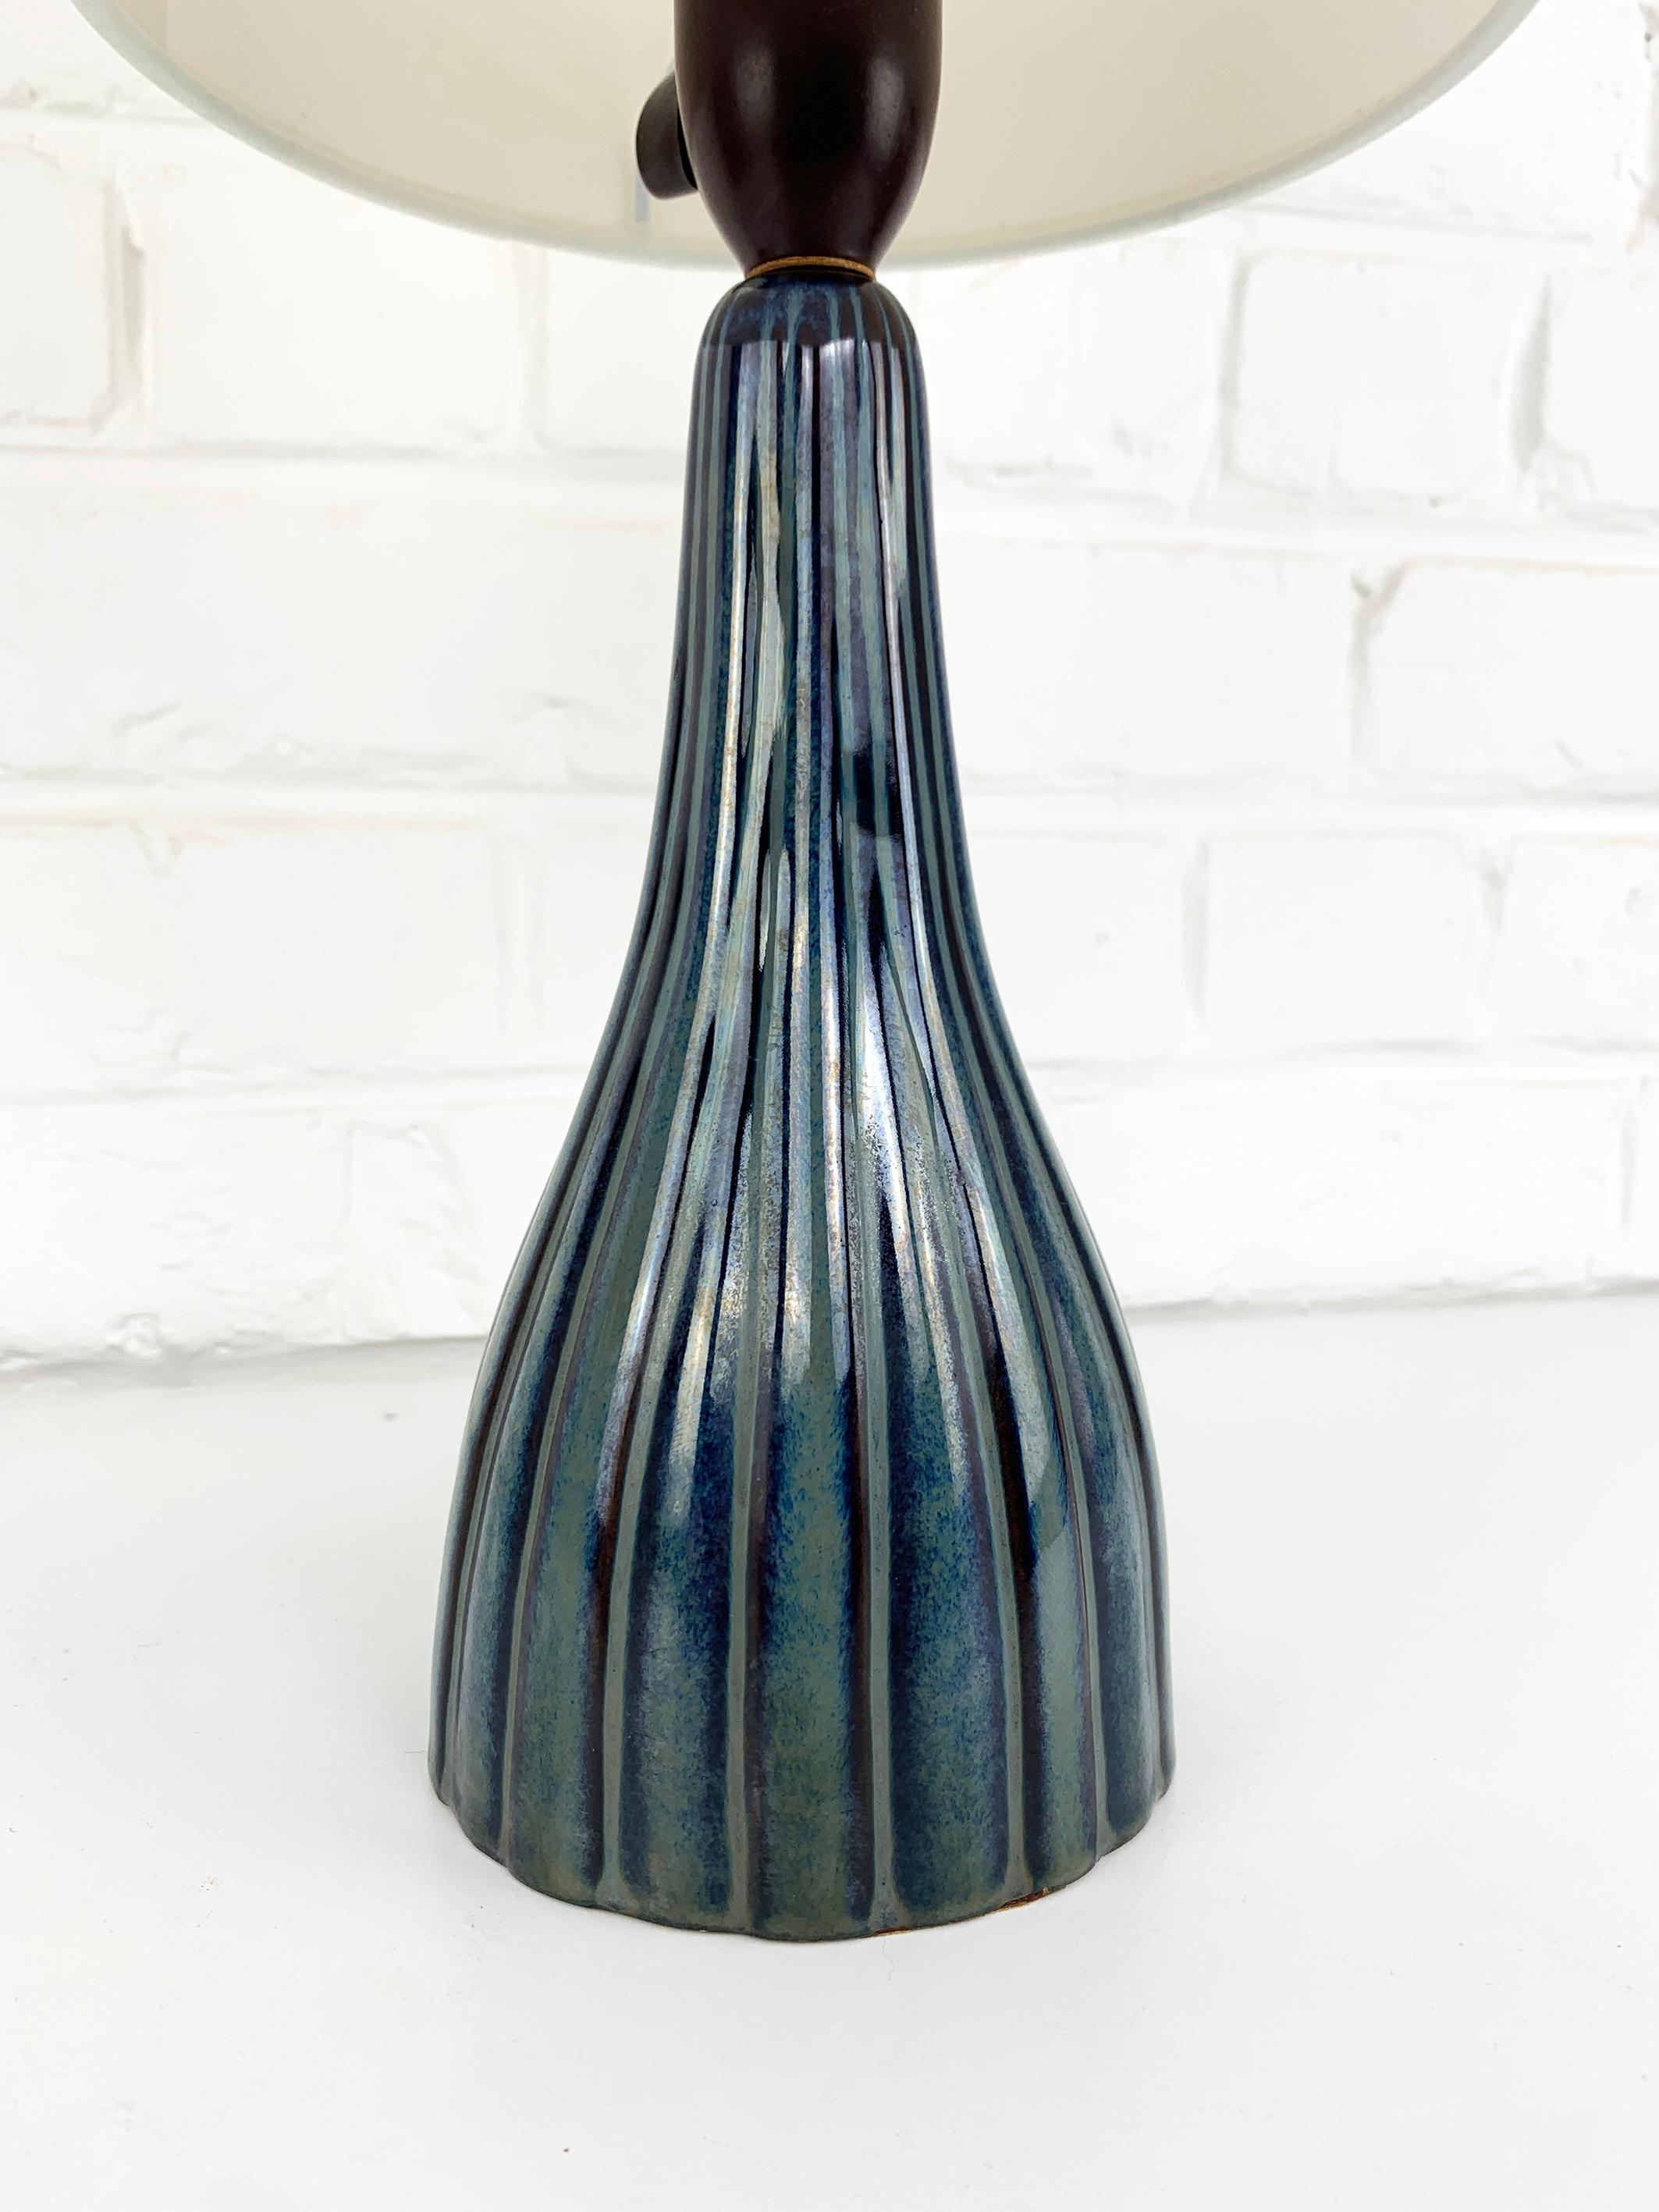 Danish Mid-Century ceramic table lamp of the 1950-60s. Very elegant design, decorated with a stripe pattern in blue-grey colours.

Unknown designer, but remains the style of the creations of Svend Aage Jensen and Svend Aage Sorensen, both worked for